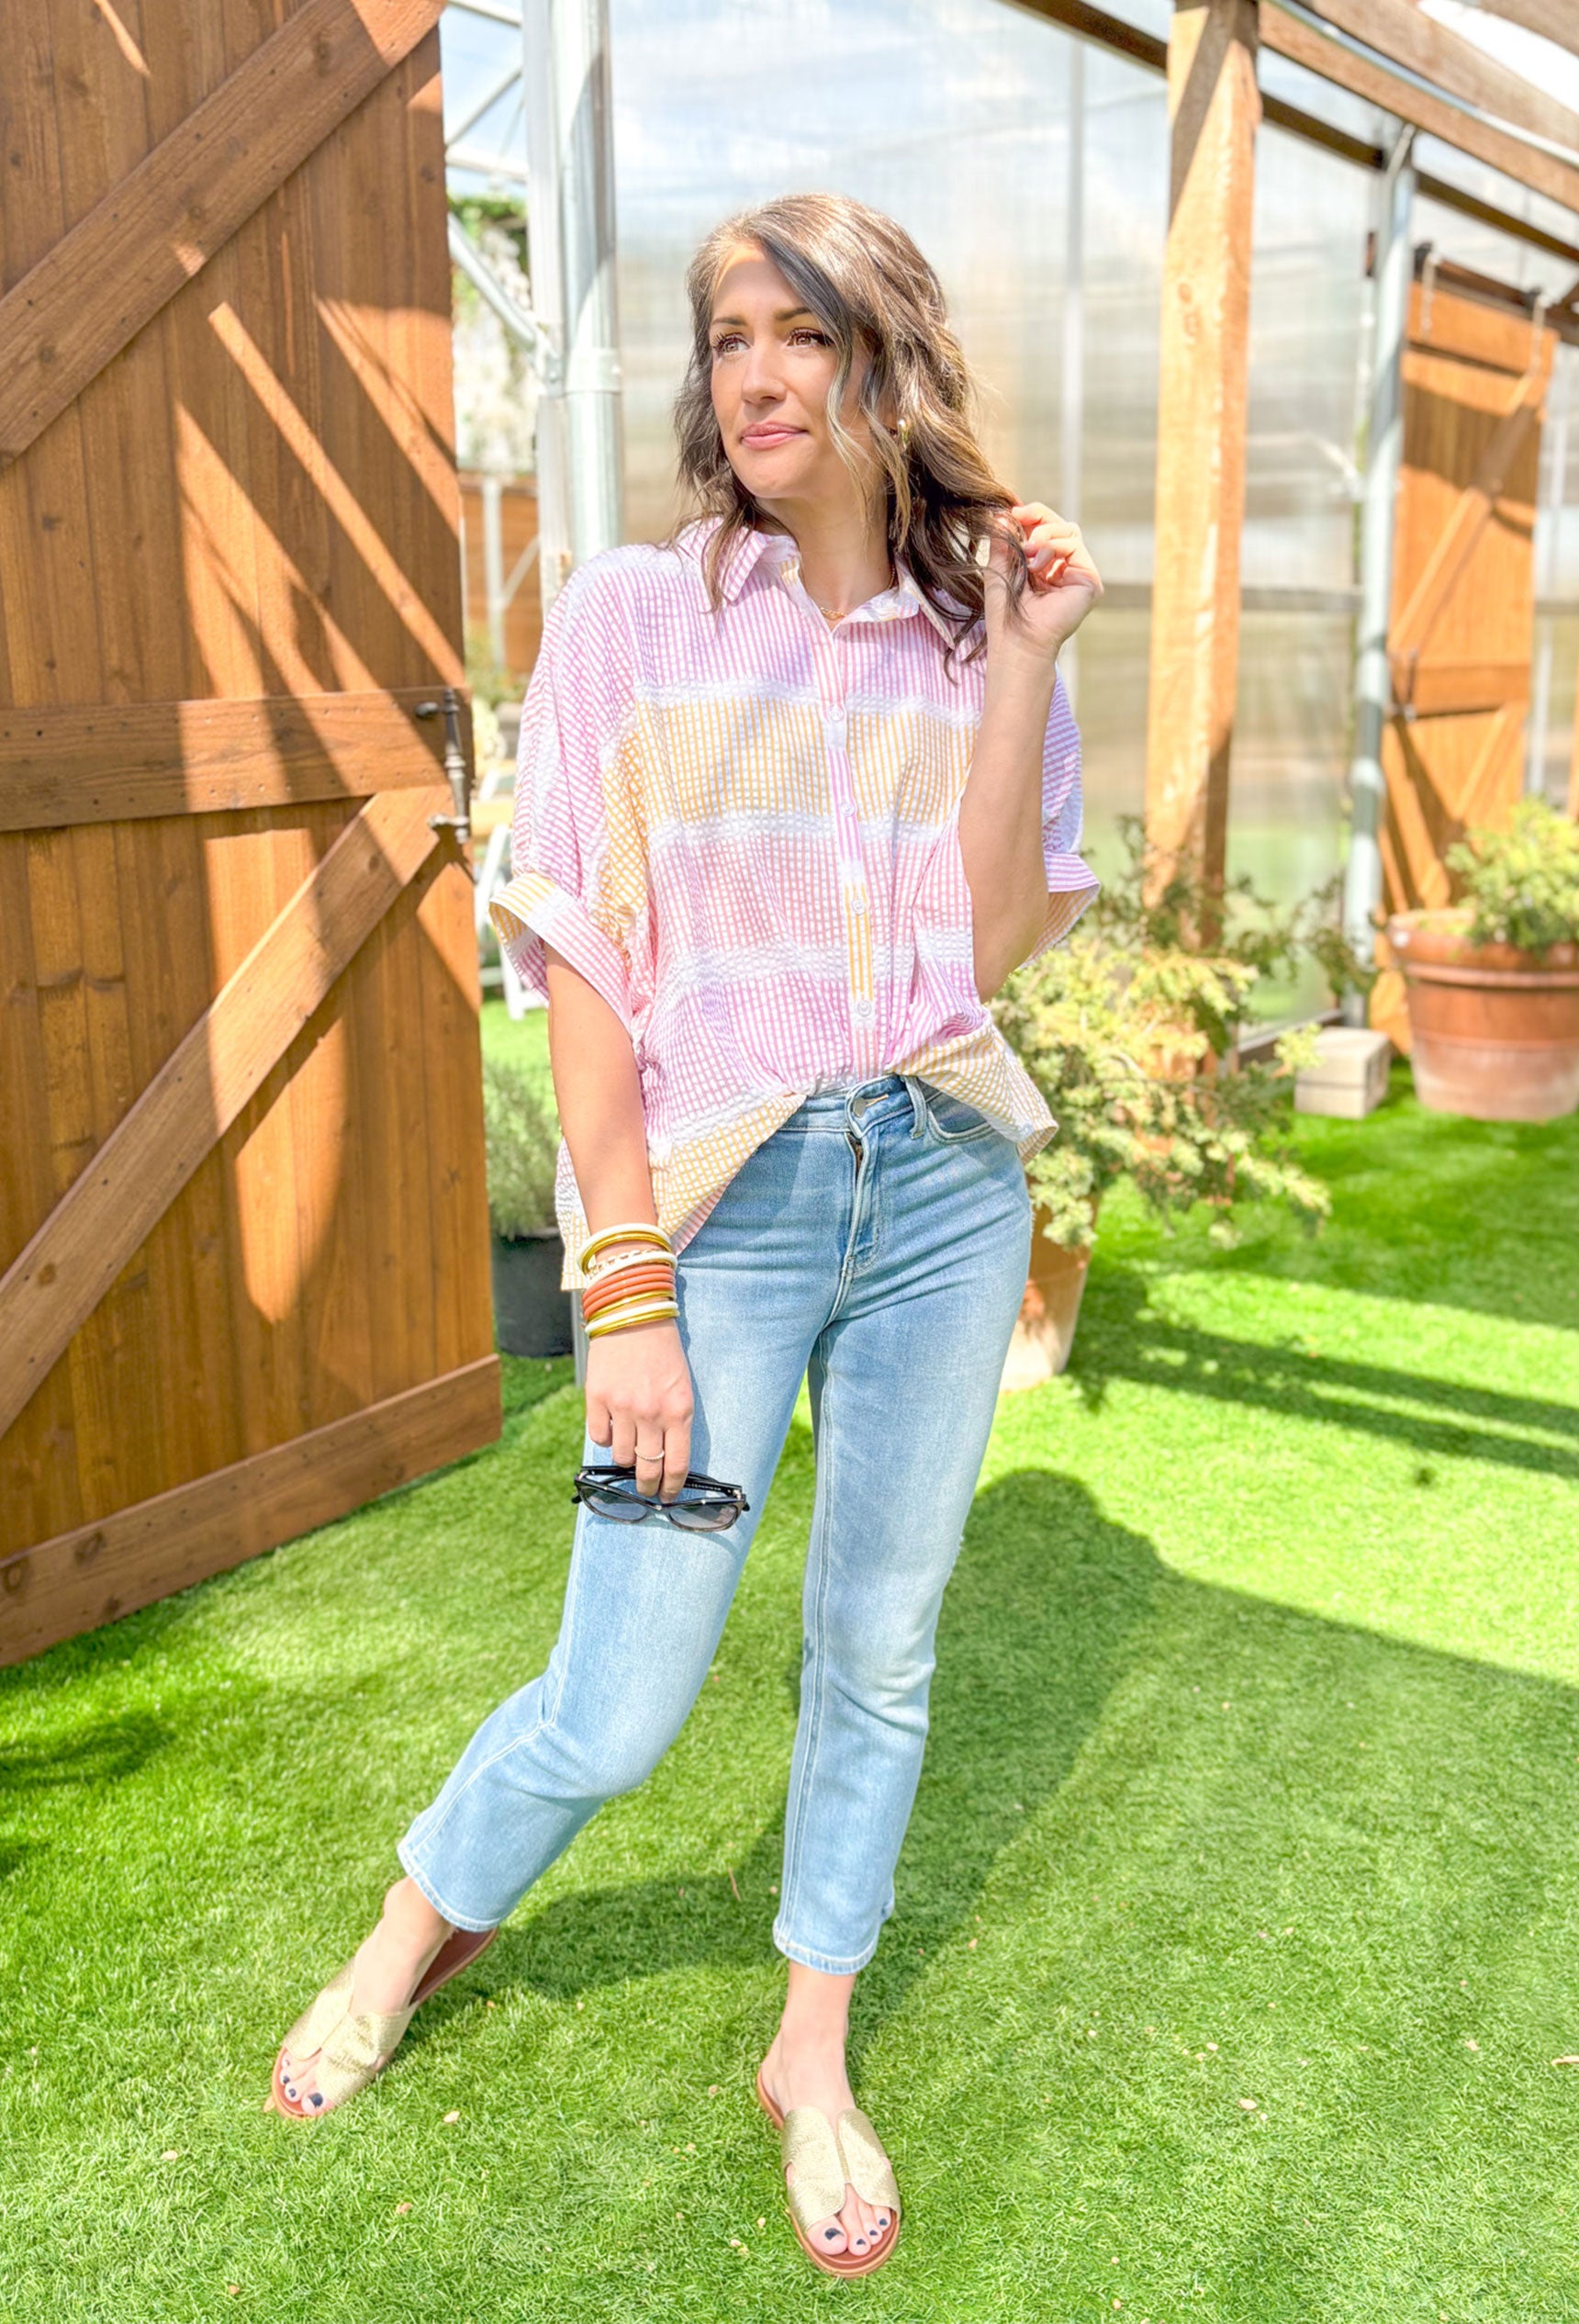 Blur The Lines Button Up Top, dulman sleeve button up top in pink, orange, and white stripes